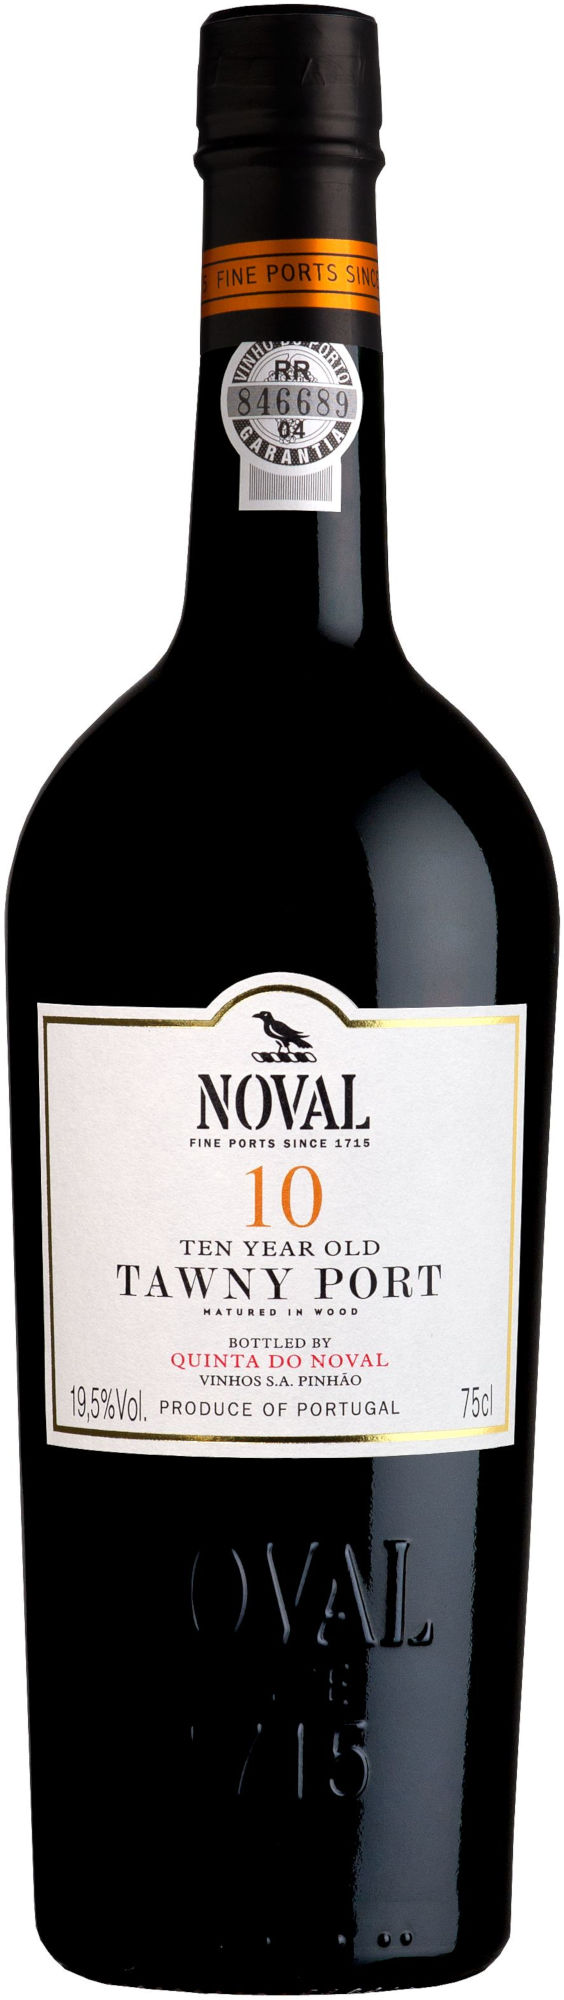 Noval-10-Years-Old-Tawny-Port